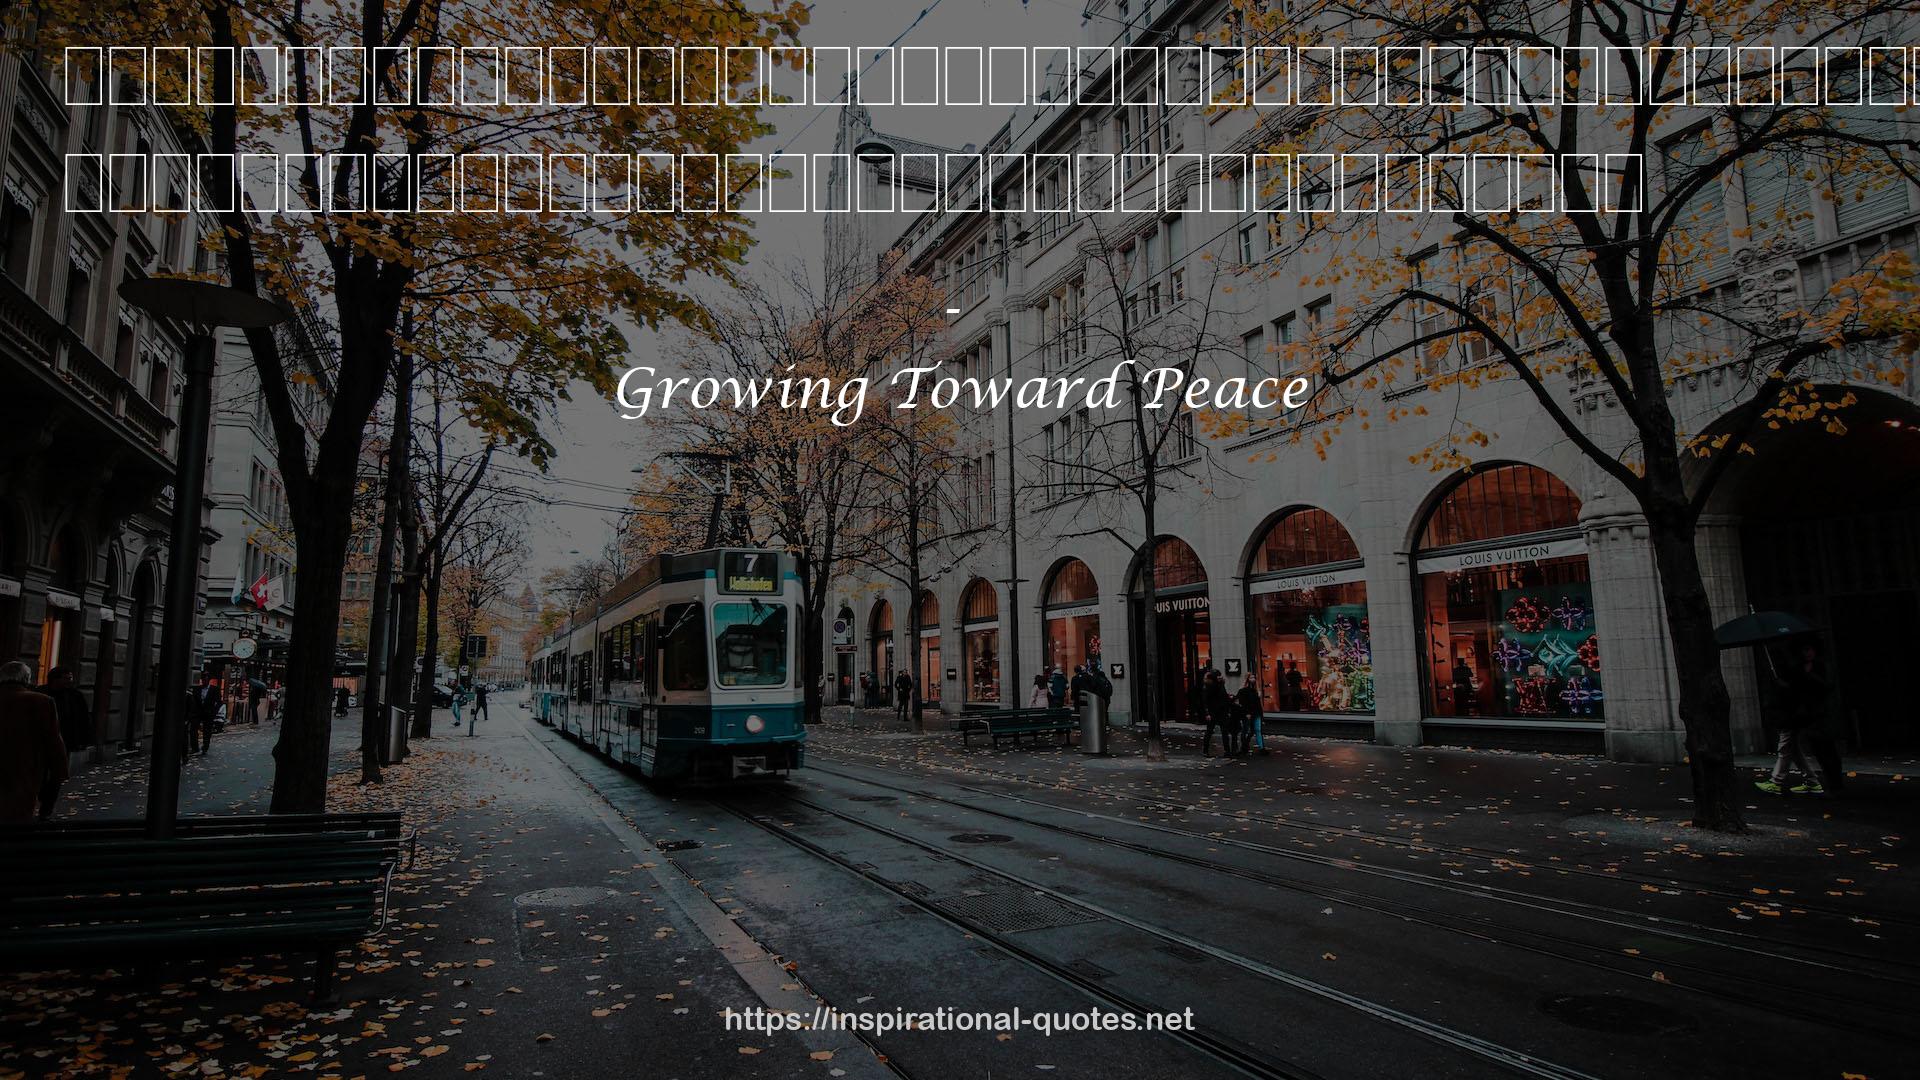 Growing Toward Peace QUOTES